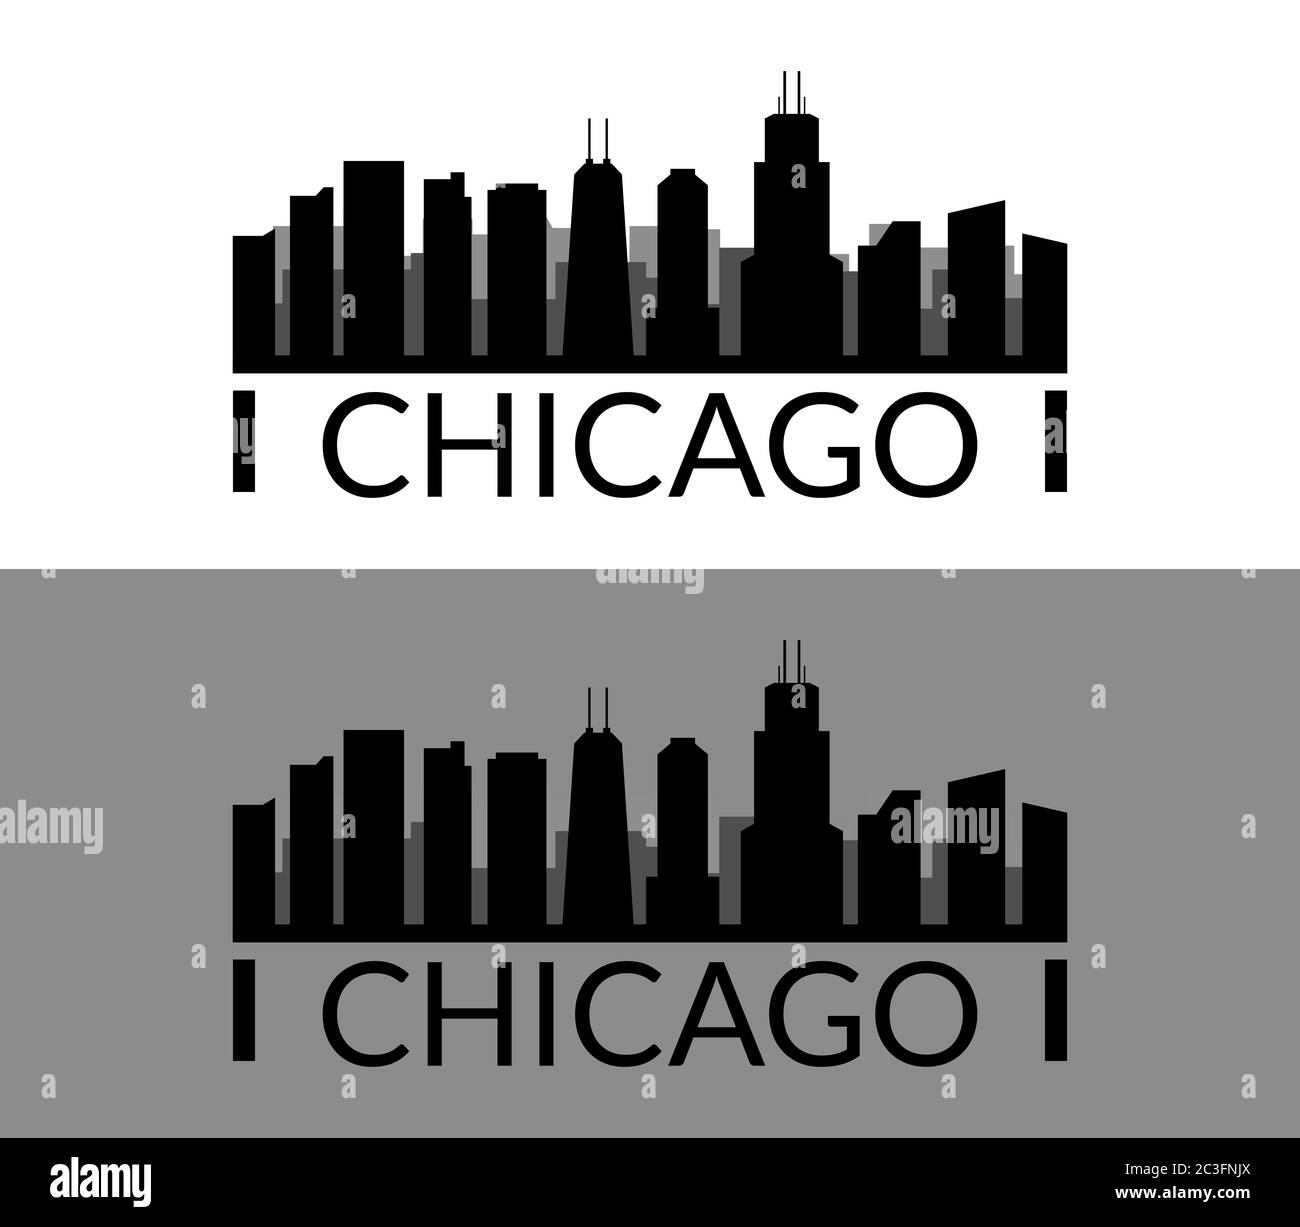 Chicago icon illustrated in vector on white background Stock Photo